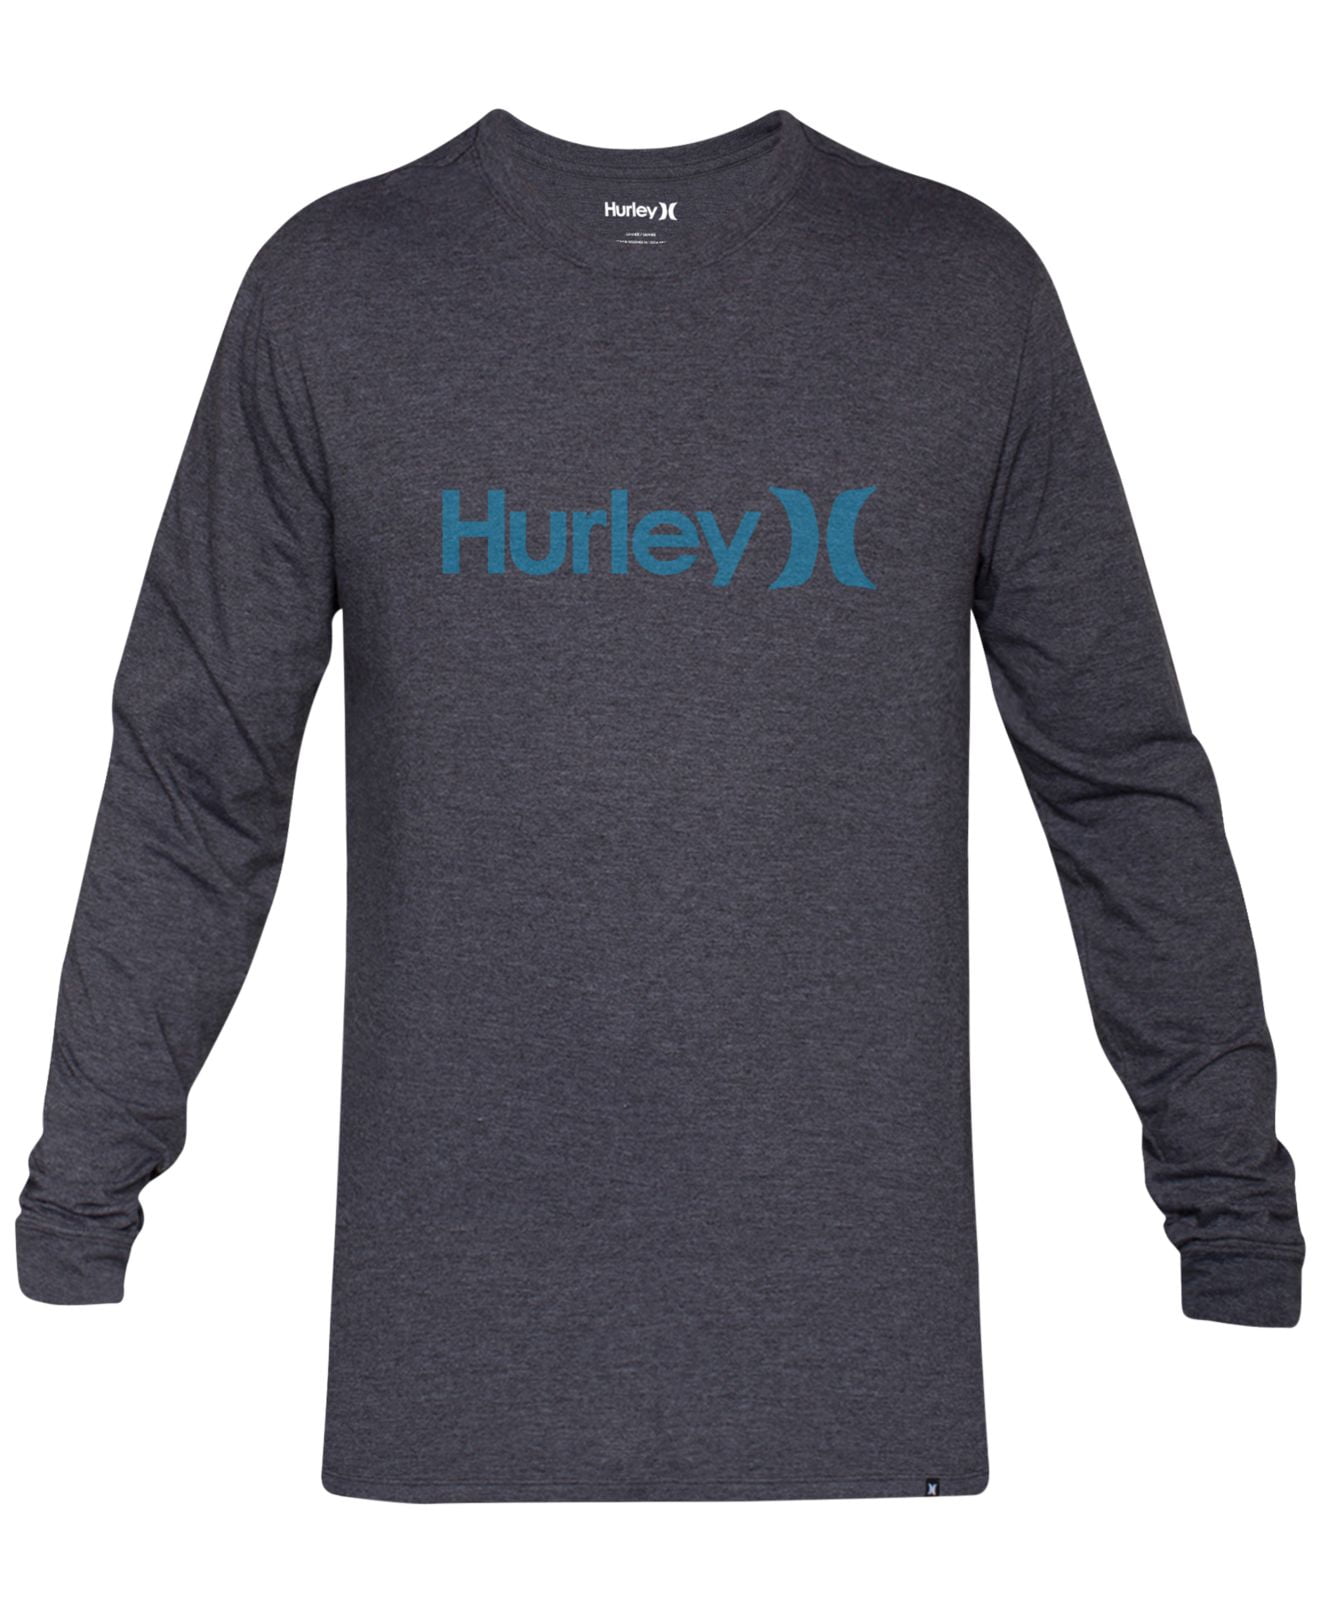 Hurley - Hurley NEW Charcoal Black Mens Size Large L Long Sleeve Tee ...